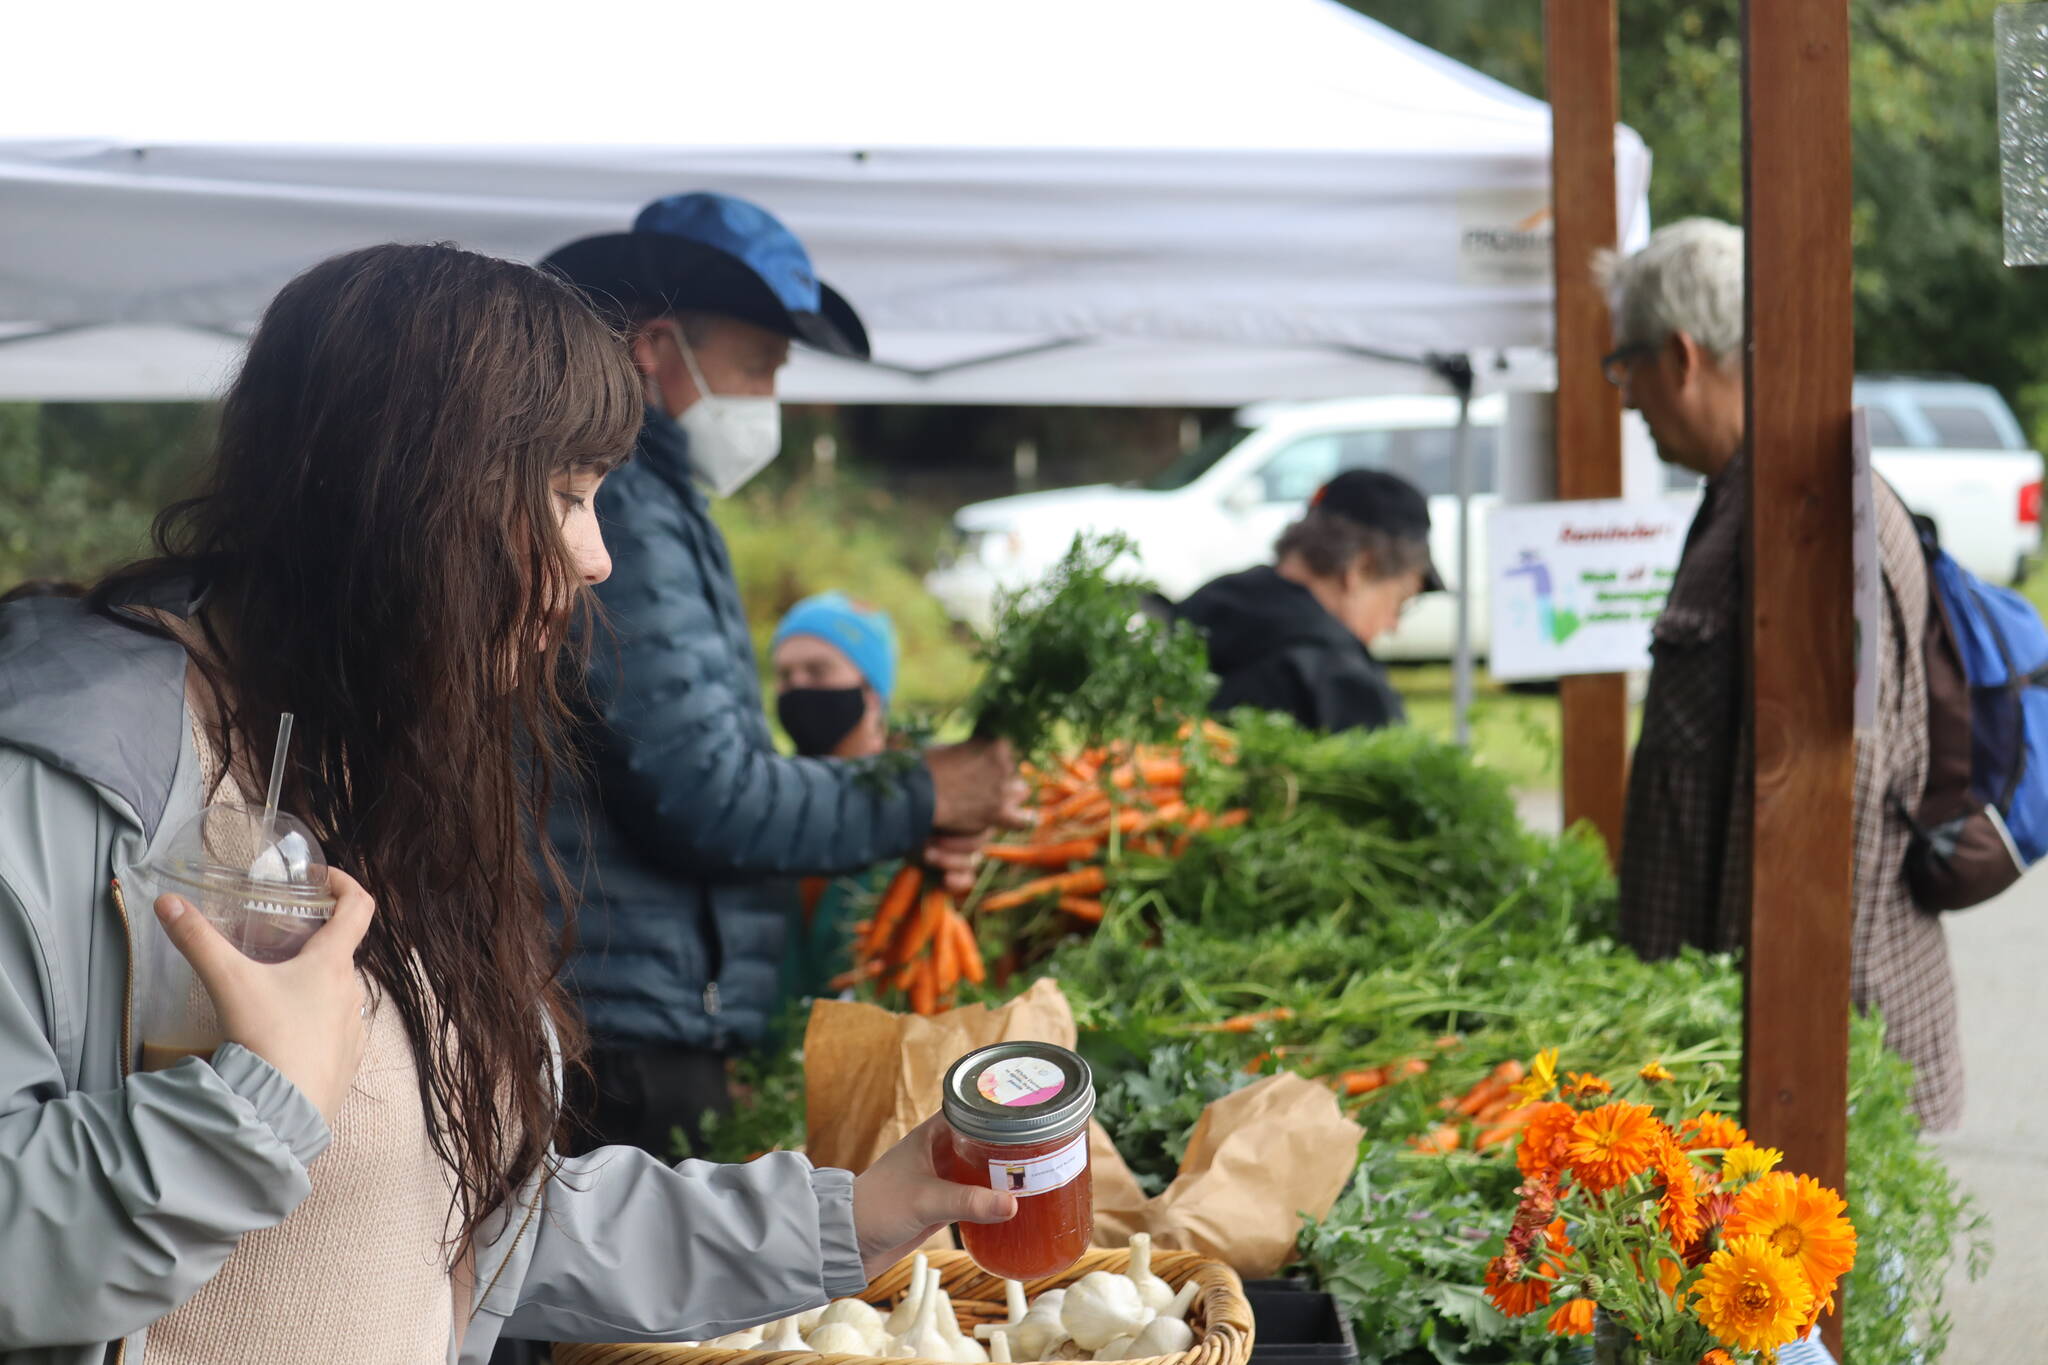 Fresh produce and flowers straight from the Juneau Community Garden were offered at the farmer’s market this year, along with jams and honey on Saturday at the Annual Juneau Community Garden Harvest Fair. (Jonson Kuhn / Juneau Empire)